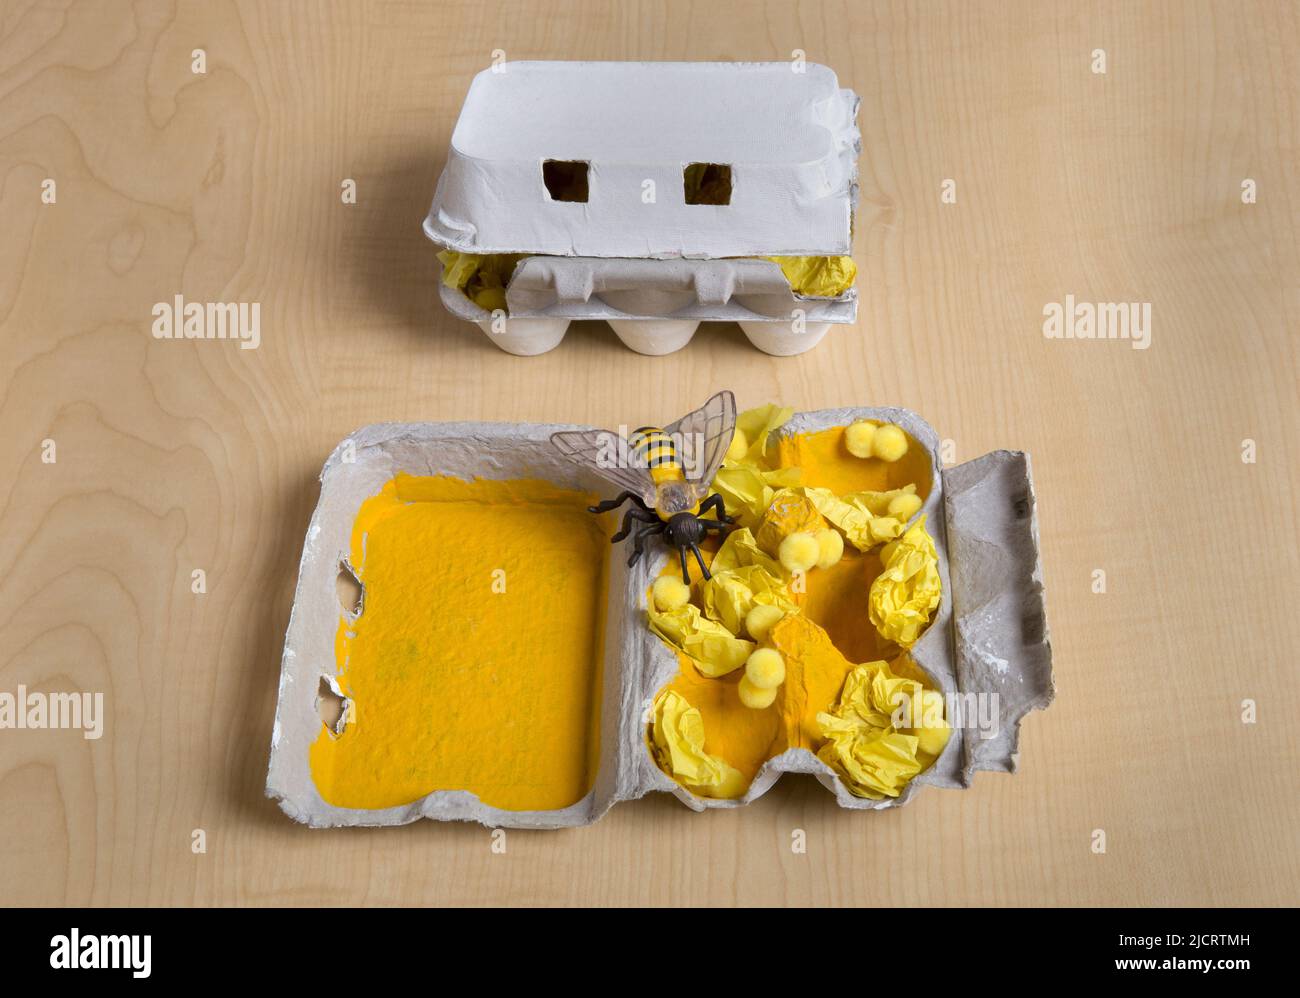 A children’s craft project using an egg carton to depict the interior of a honeybee honeycomb with larvae and pollen. Stock Photo